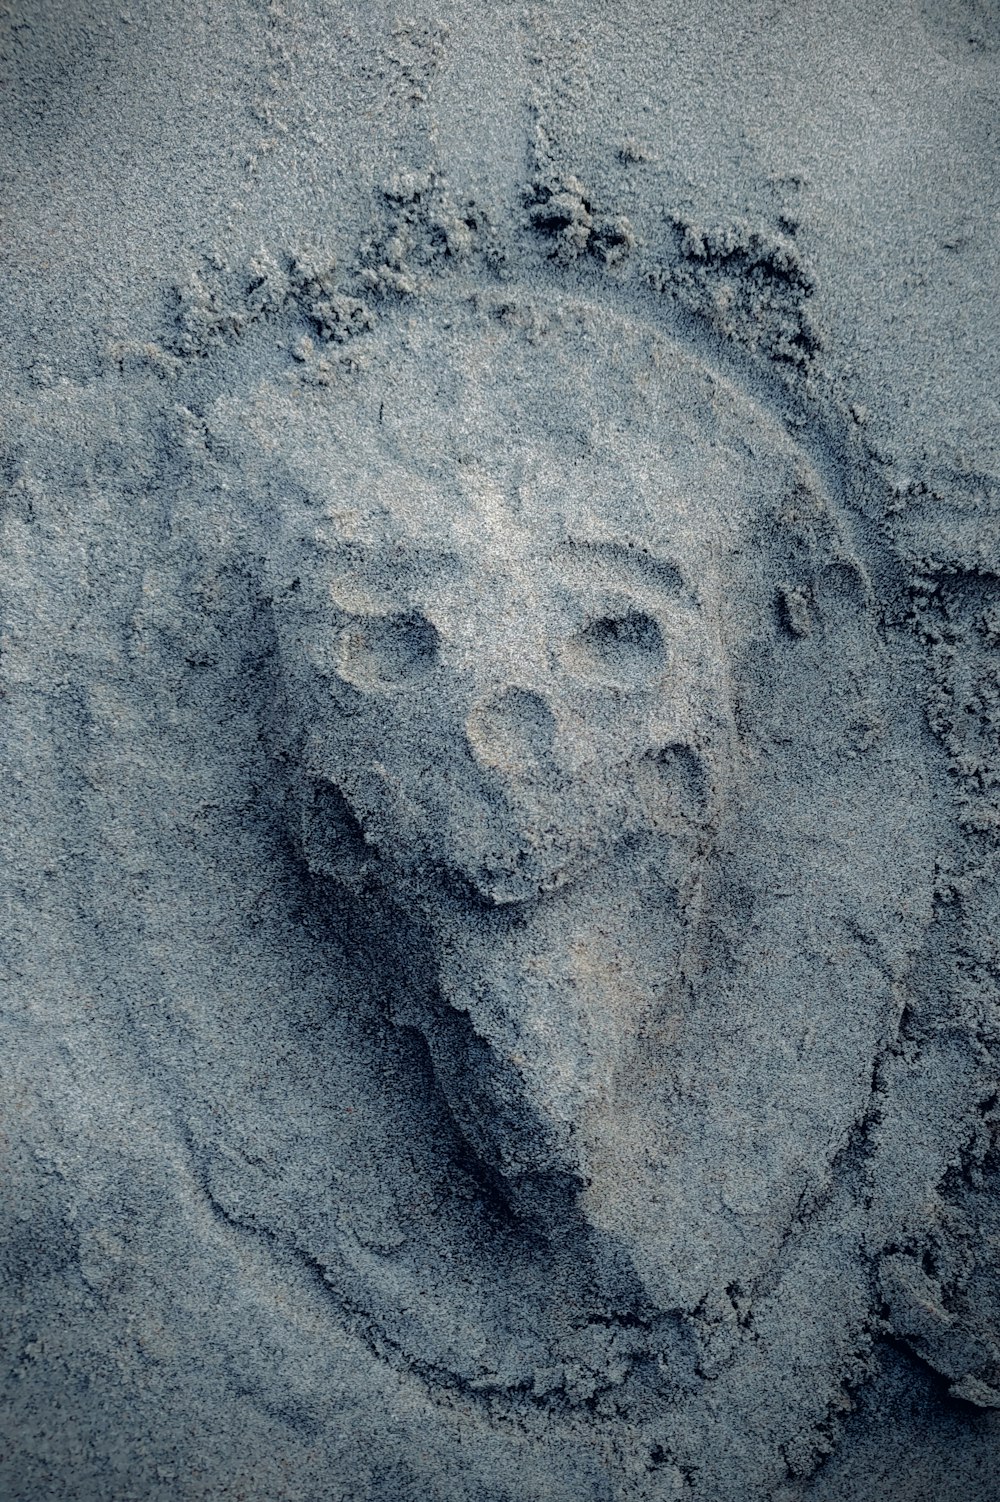 a picture of a face in the sand